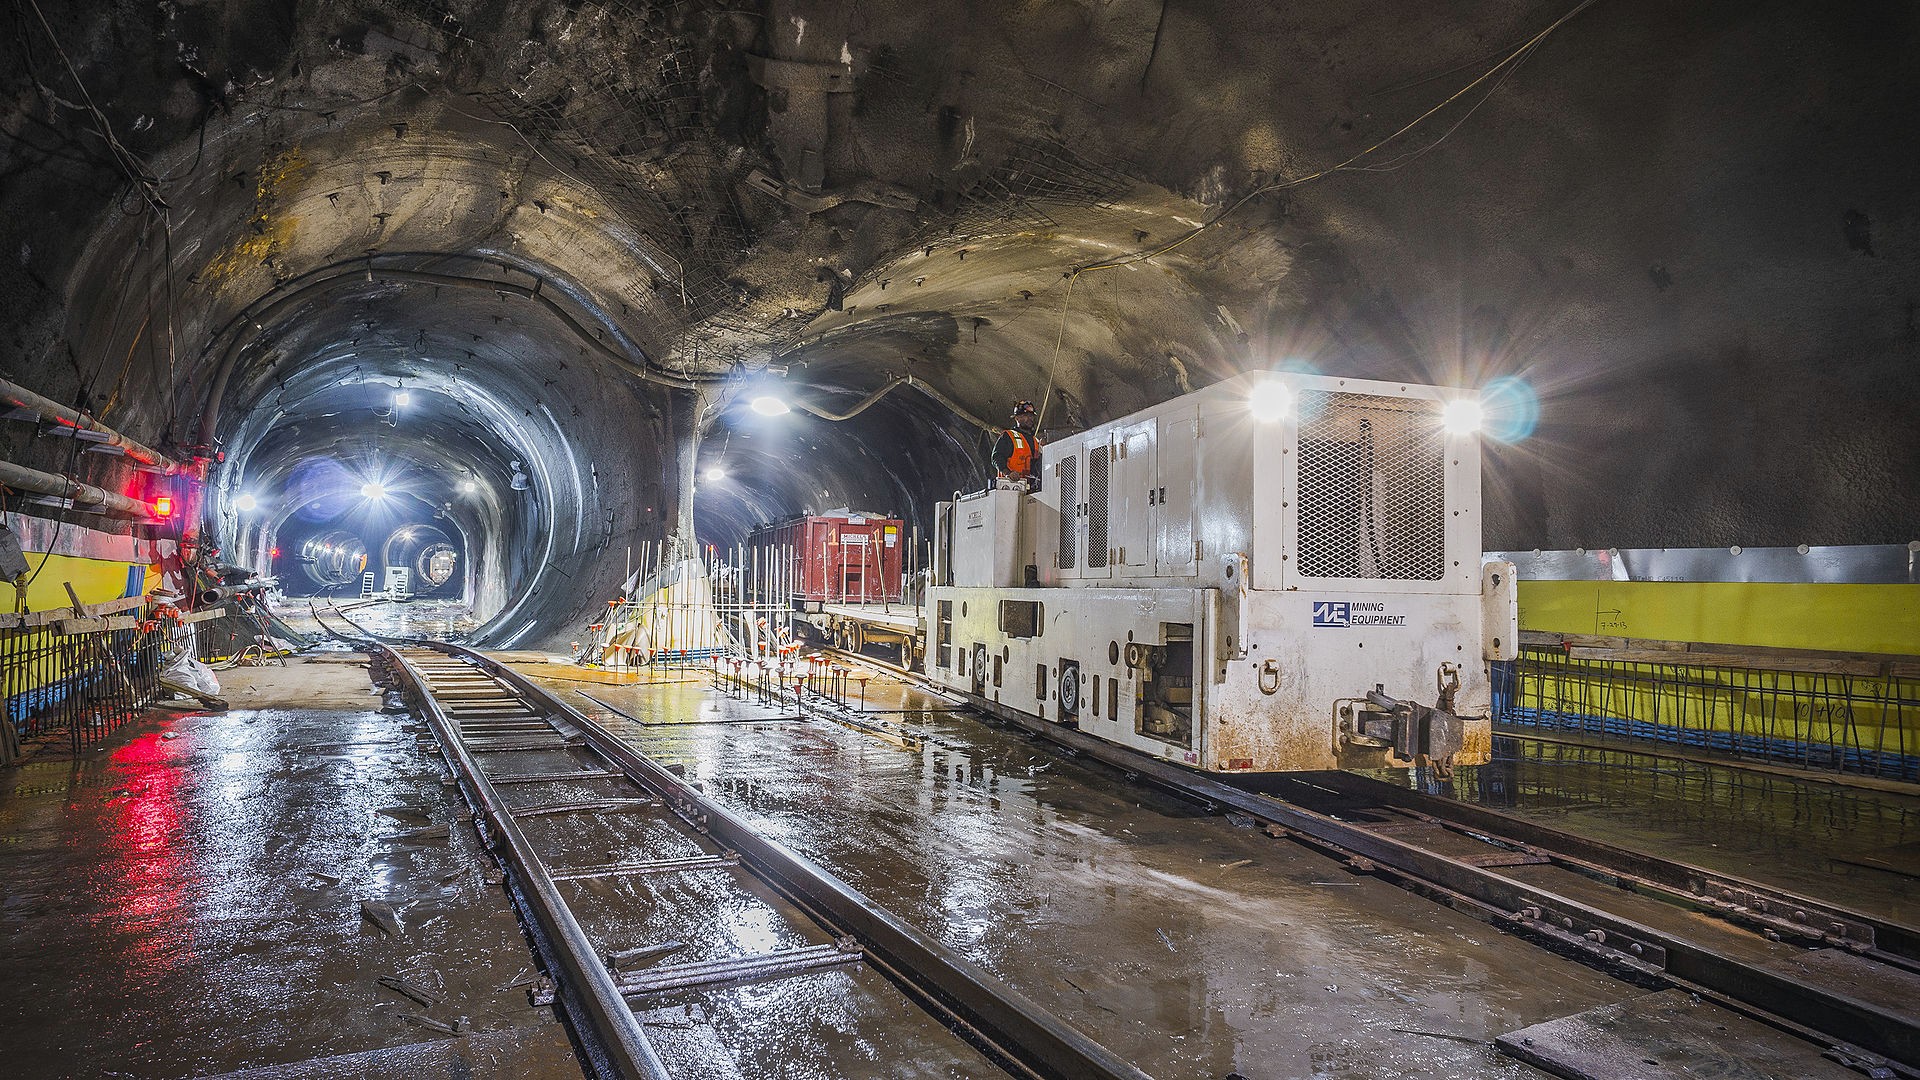 subway tunnel with subway cars and tracks with workers around the work site